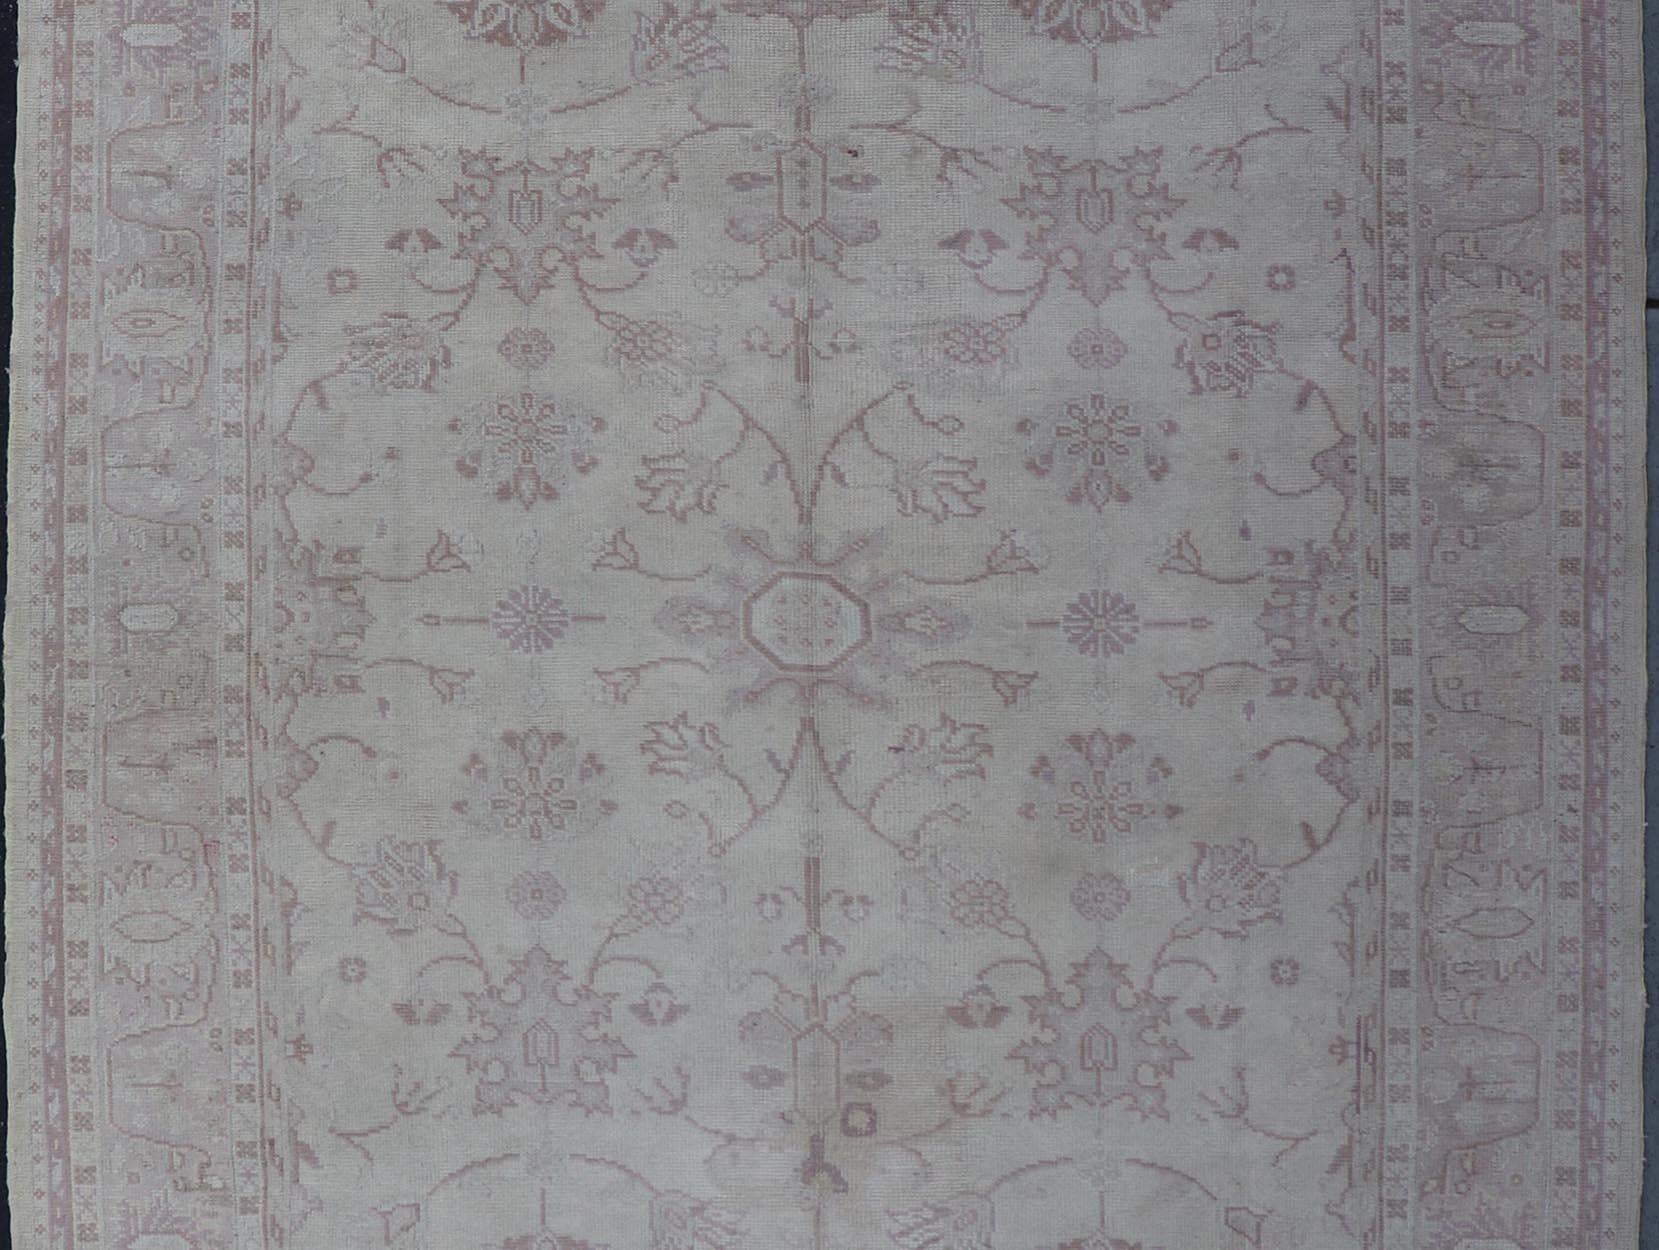 Antique Turkish Oushak Rug with Floral Patterns in Cream and Neutral Colors  For Sale 8